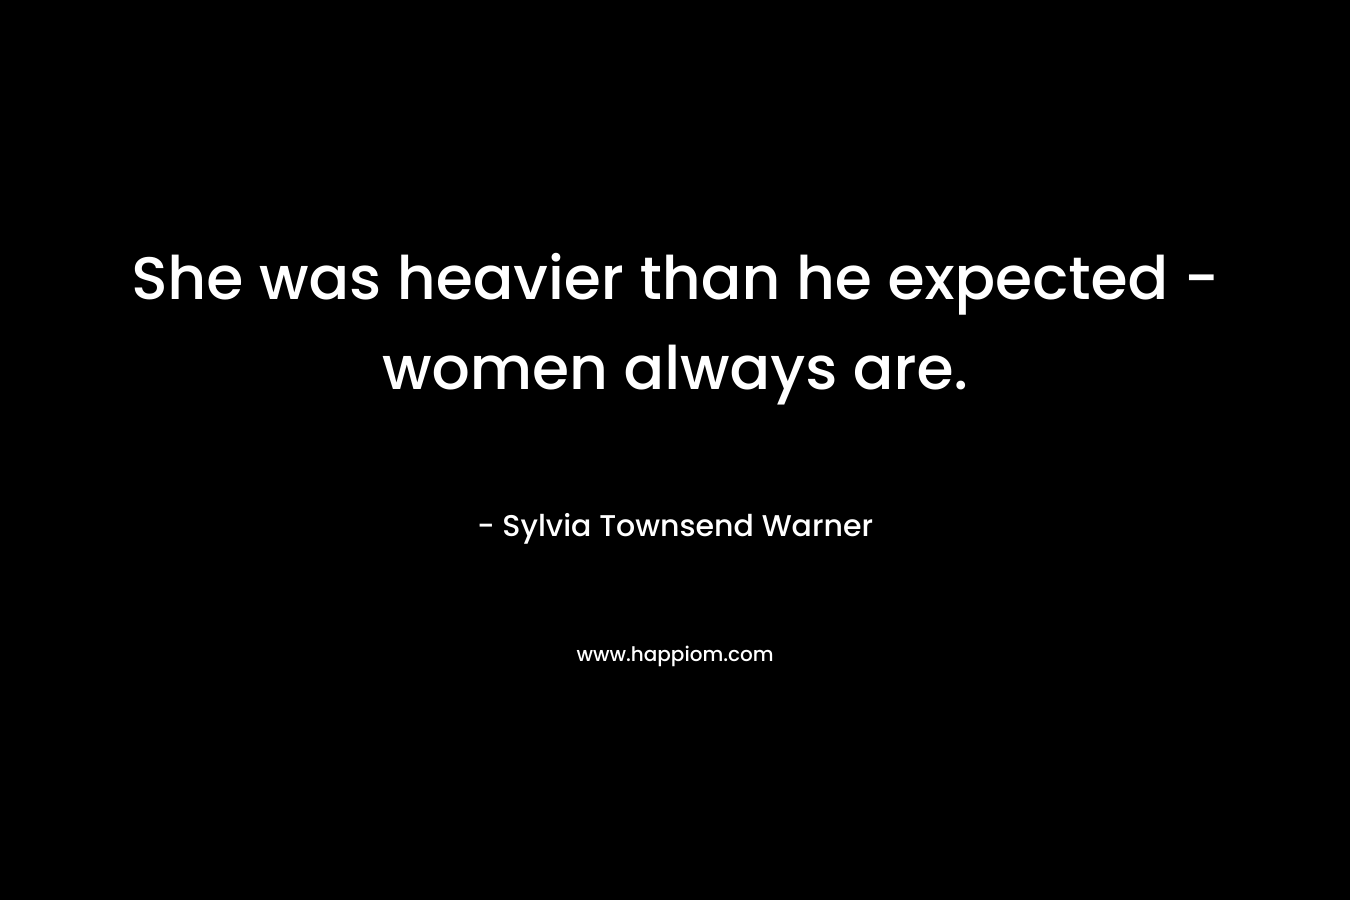 She was heavier than he expected - women always are.